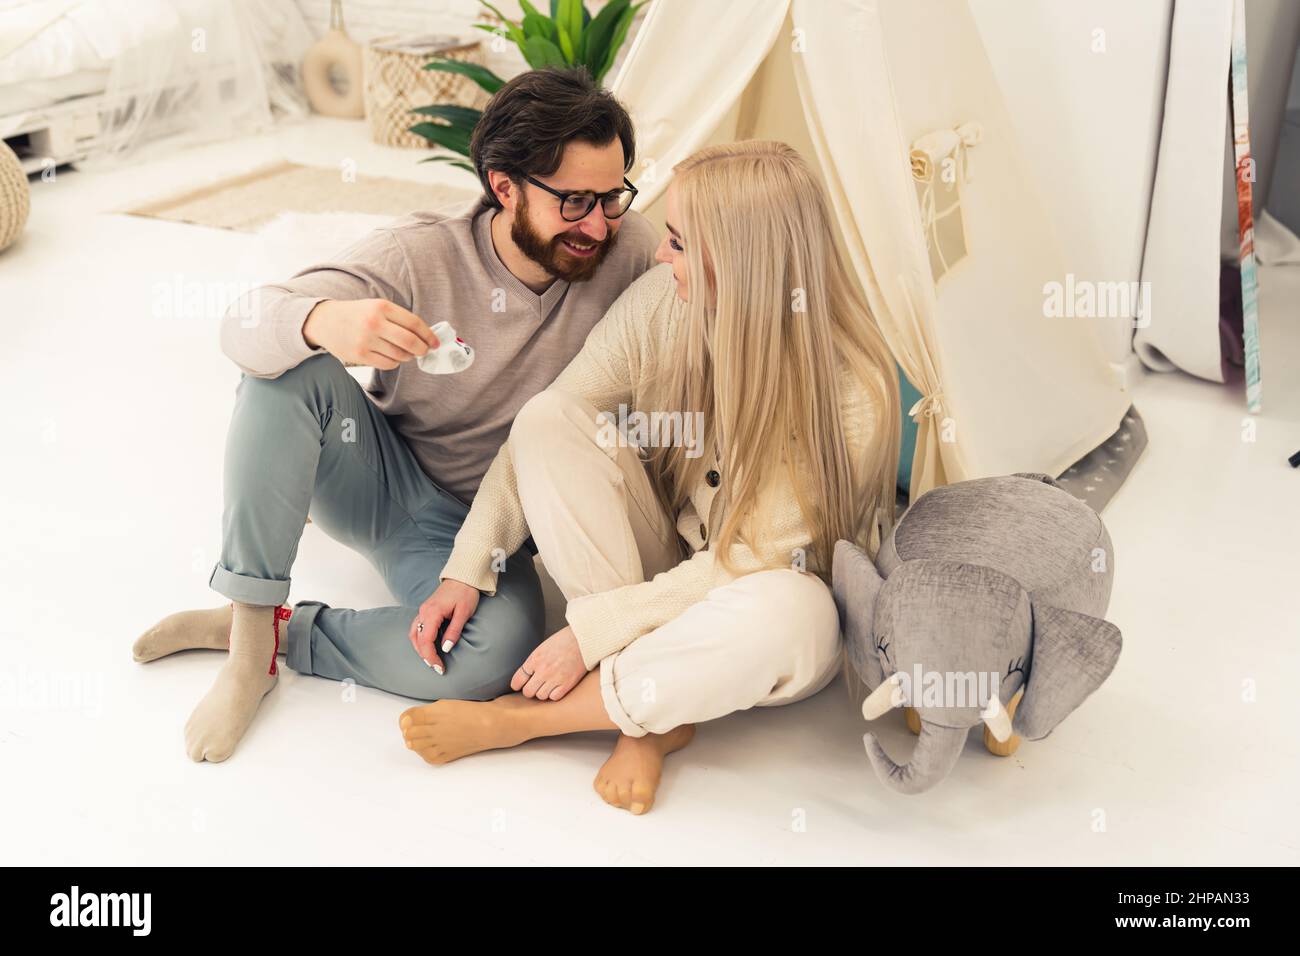 soon-to-be parents in their late 20s sitting in a baby's room, holding little infant shoe, and talking about the future. High quality photo Stock Photo